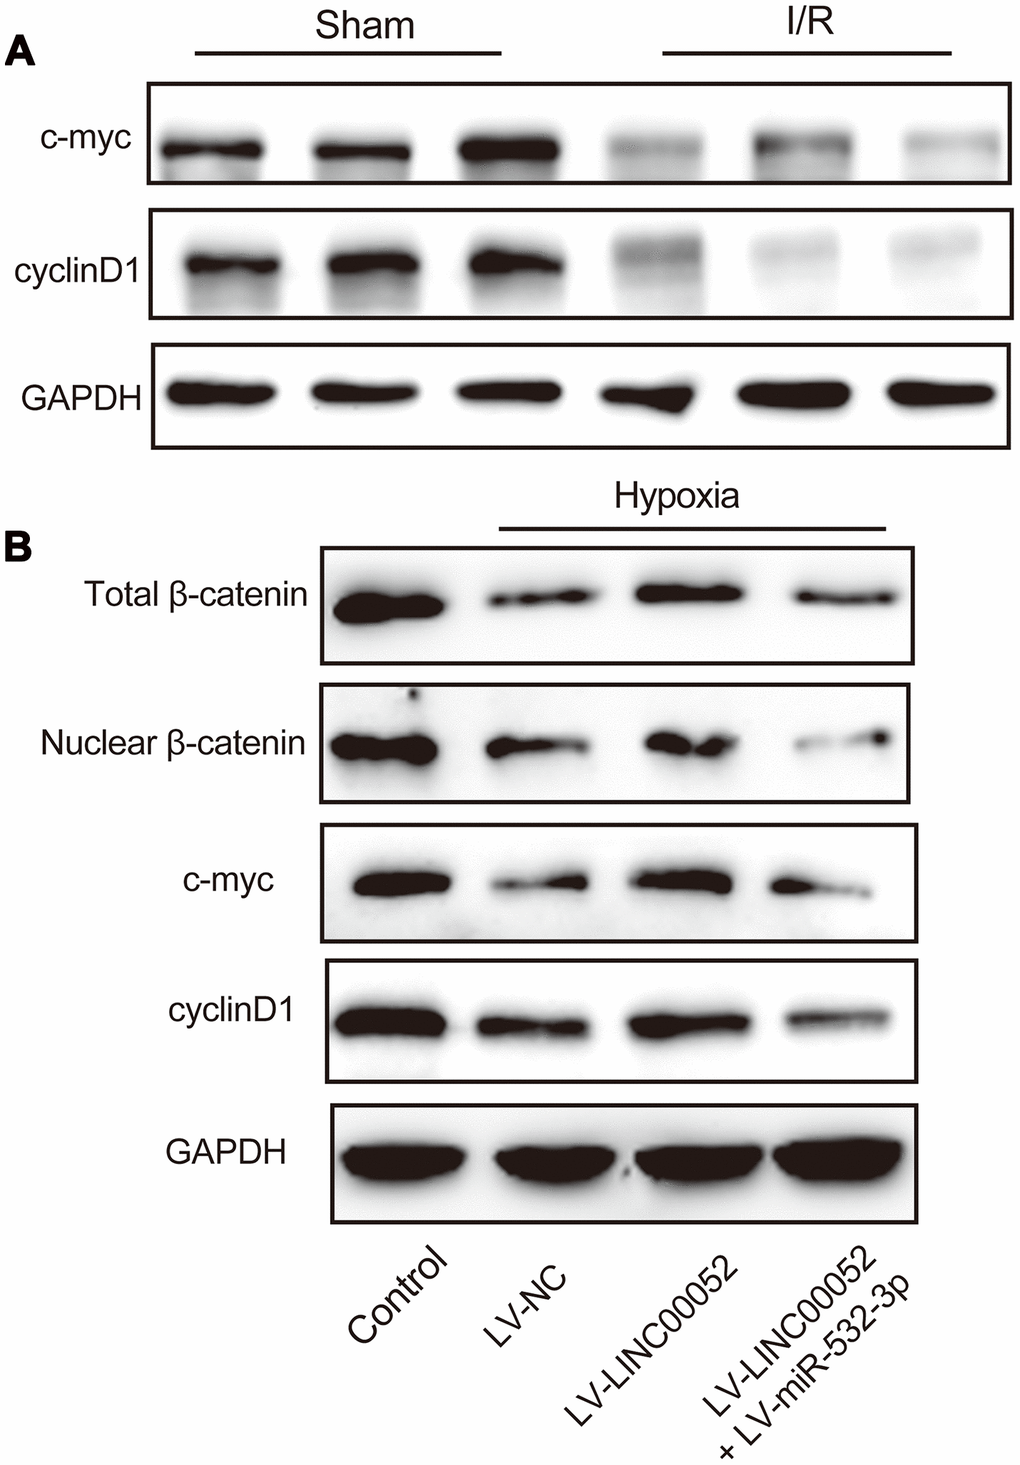 miR-532-3p abolishes the repressive effect of LINC00520 by inactivation of the Wnt/β-catenin pathway in NRK-52E cells. (A) IHC staining of c-myc and cyclin D1 in AKI rat models. (B) Expression of β-catenin, c-myc, and cyclin D1 proteins in NRK-52E cells infected with a combination of LV-LINC00052 and LV-miR-532-3p or LV-LINC00052 and LV-miR-532-3p. Three independent experiments were performed. Error bars represent the mean ± SD of triplicate experiments (at least). *p 